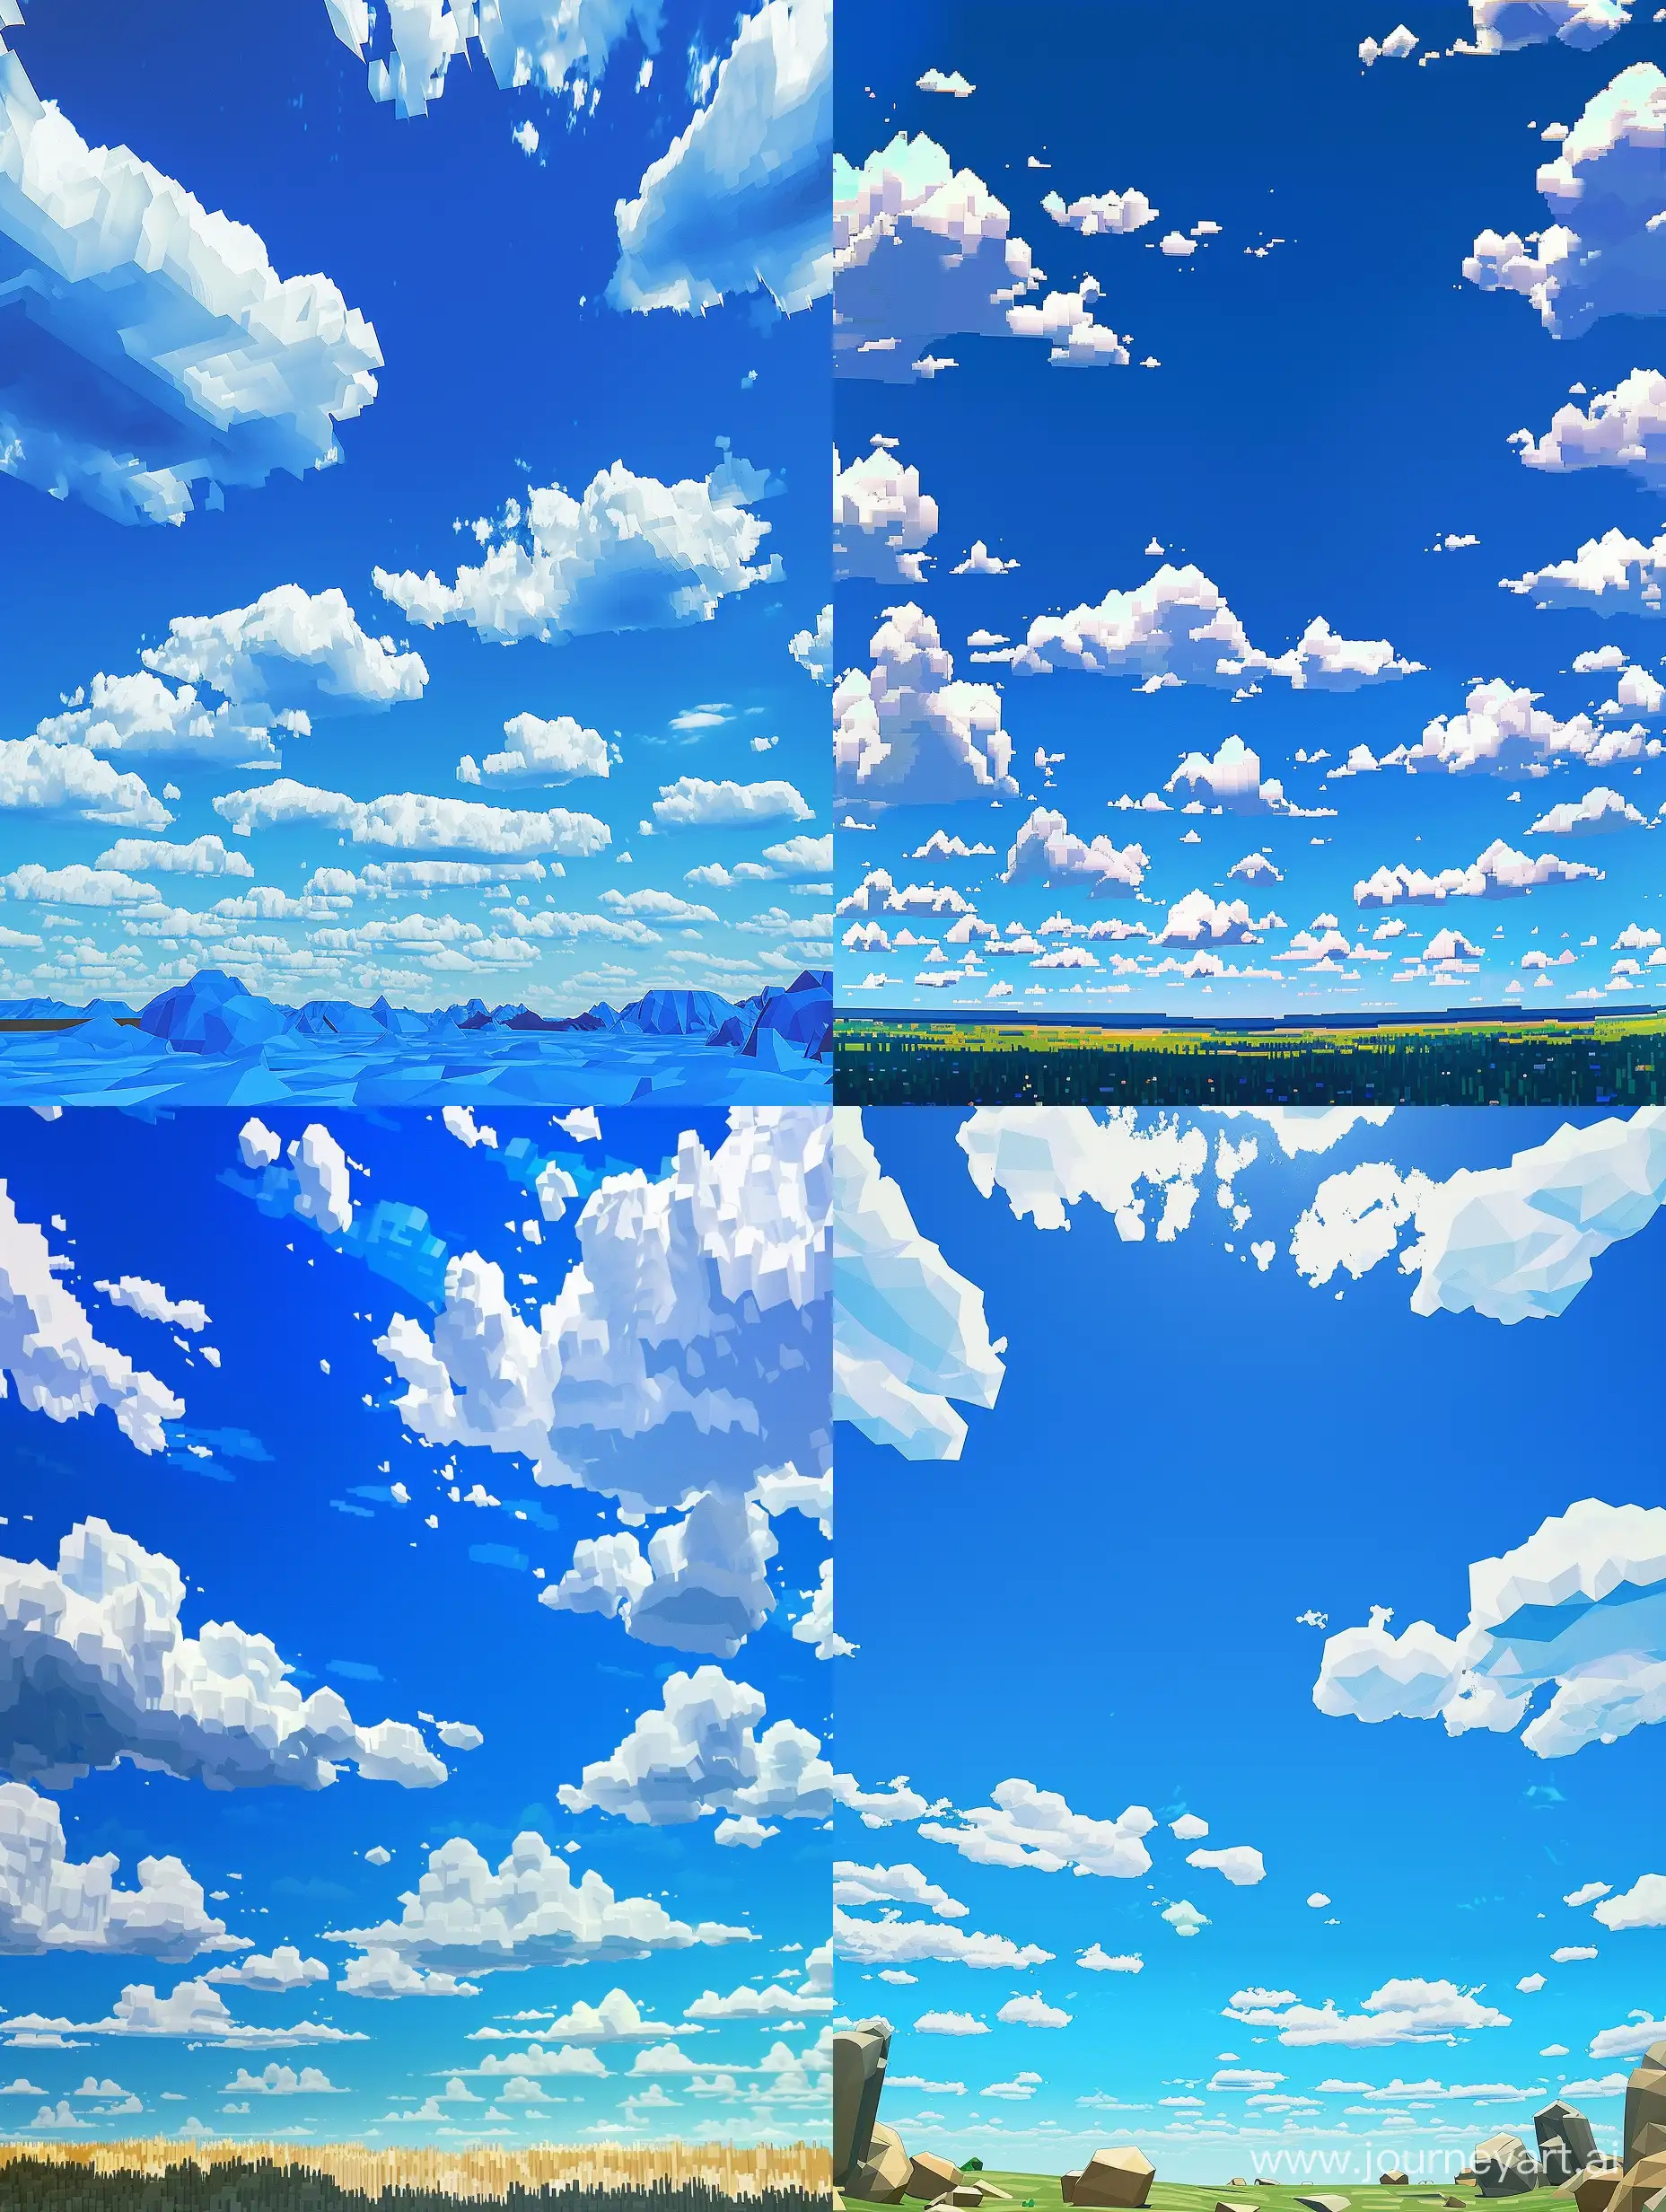 2000s videogame blue sky with white clouds landscape scene, nostalgia, daytime, bright, low poly, computer graphics, digital glitch, nintendo 64 graphics